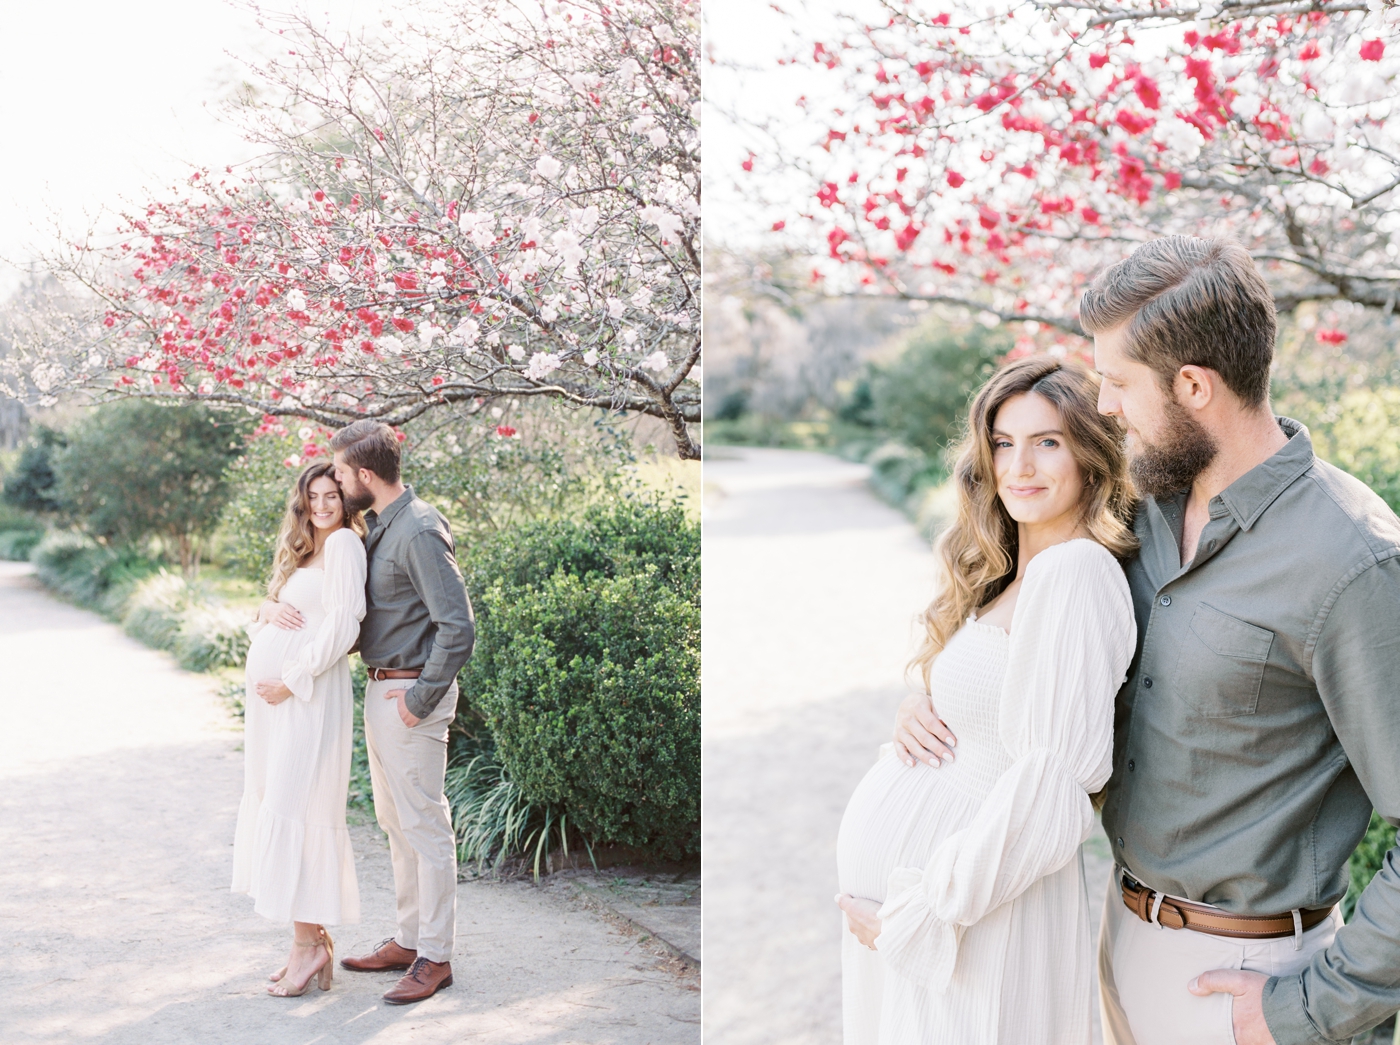 Dad kissing Mom in park maternity session on 35mm film. Photos by Caitlyn Motycka Photography.